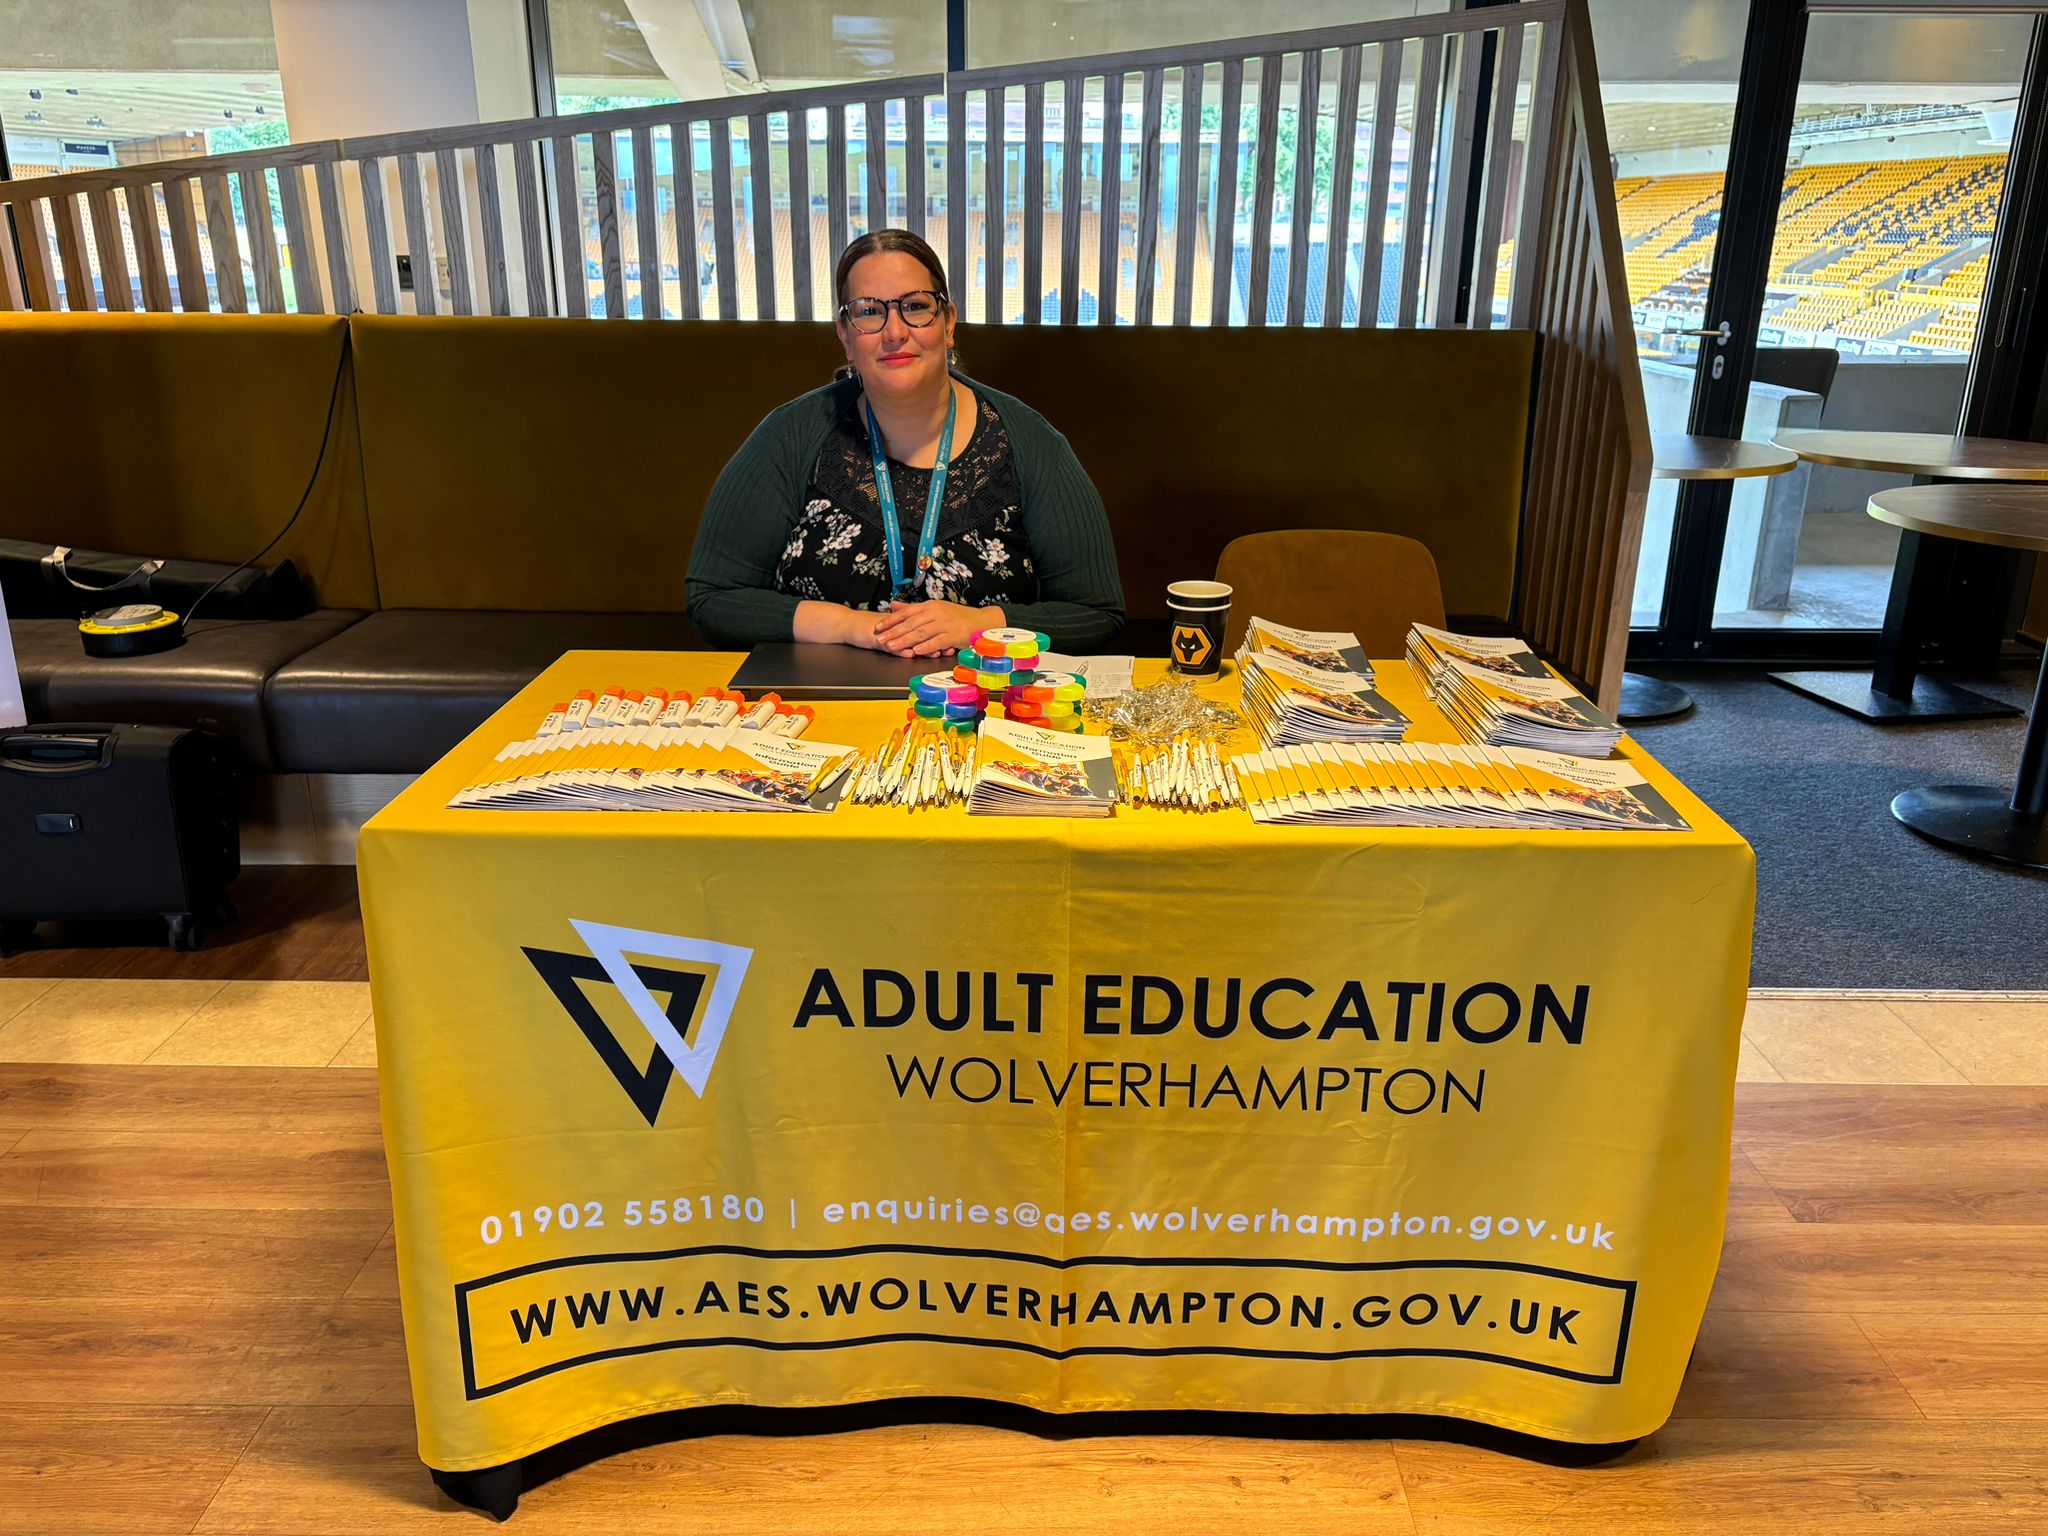 Adult Education Wolverhampton at our event in Wolverhampton